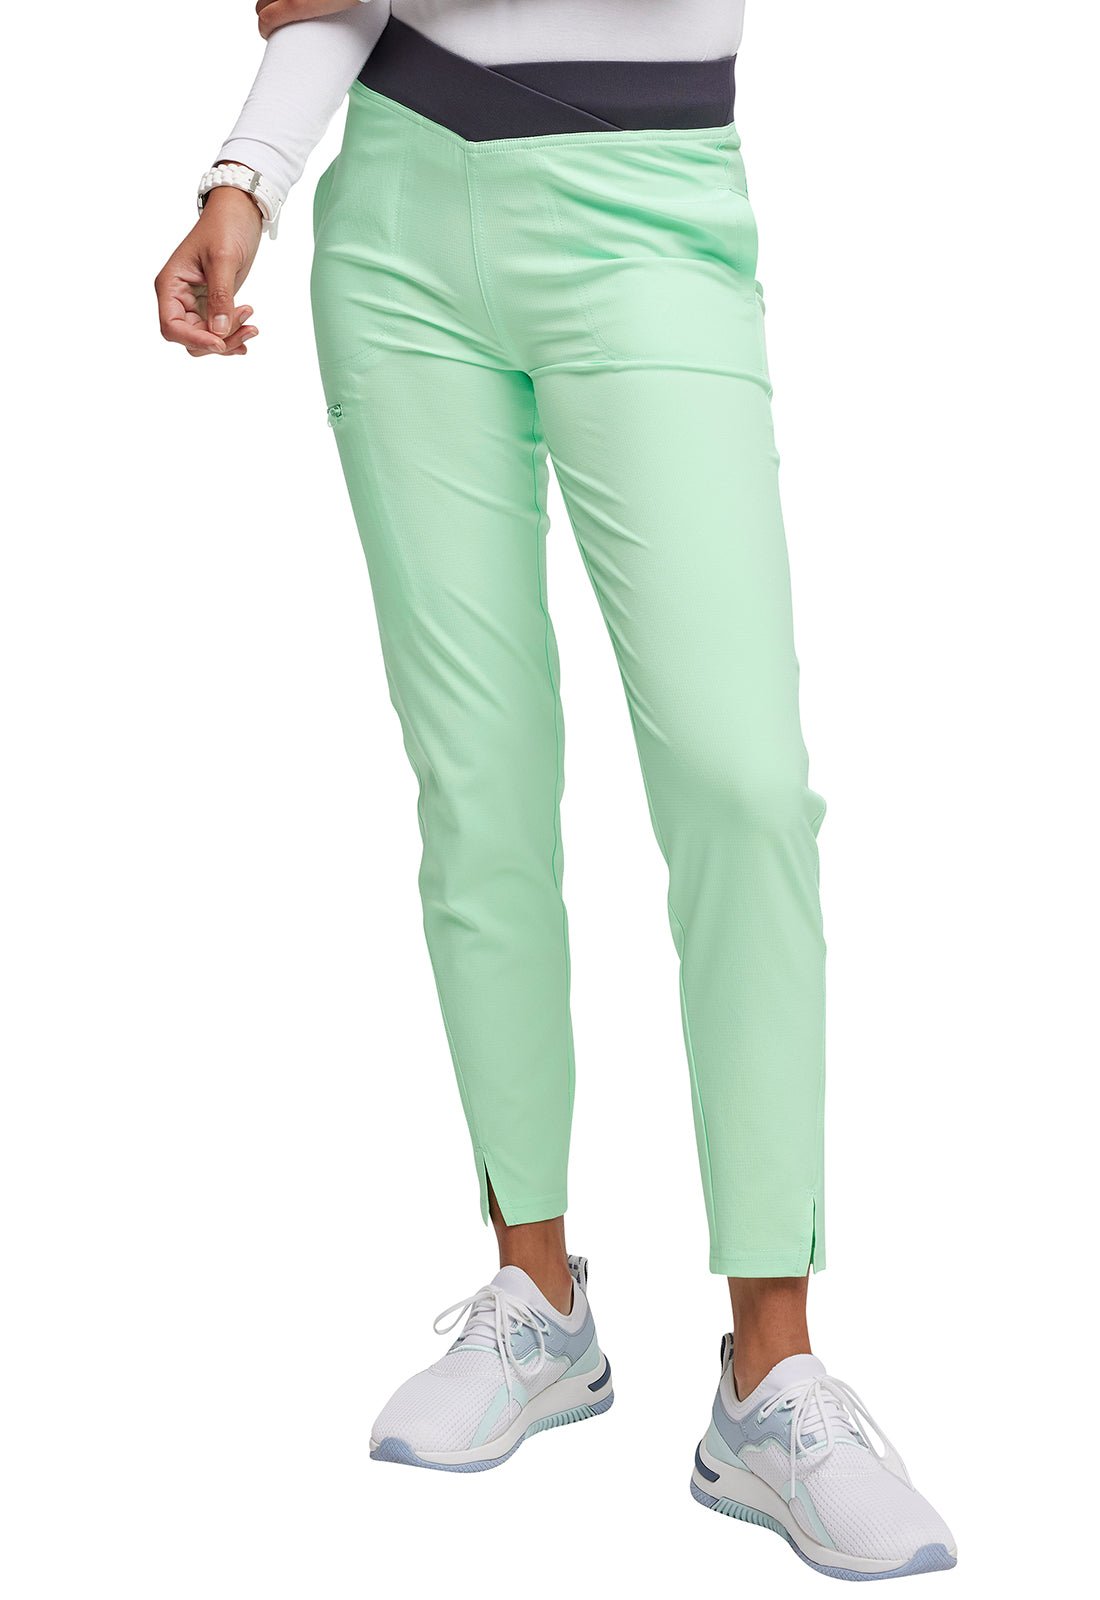 Packable HeartSoul Pull On Pant HS293 in Pink Cloud, Pixie Green - Scrubs Select